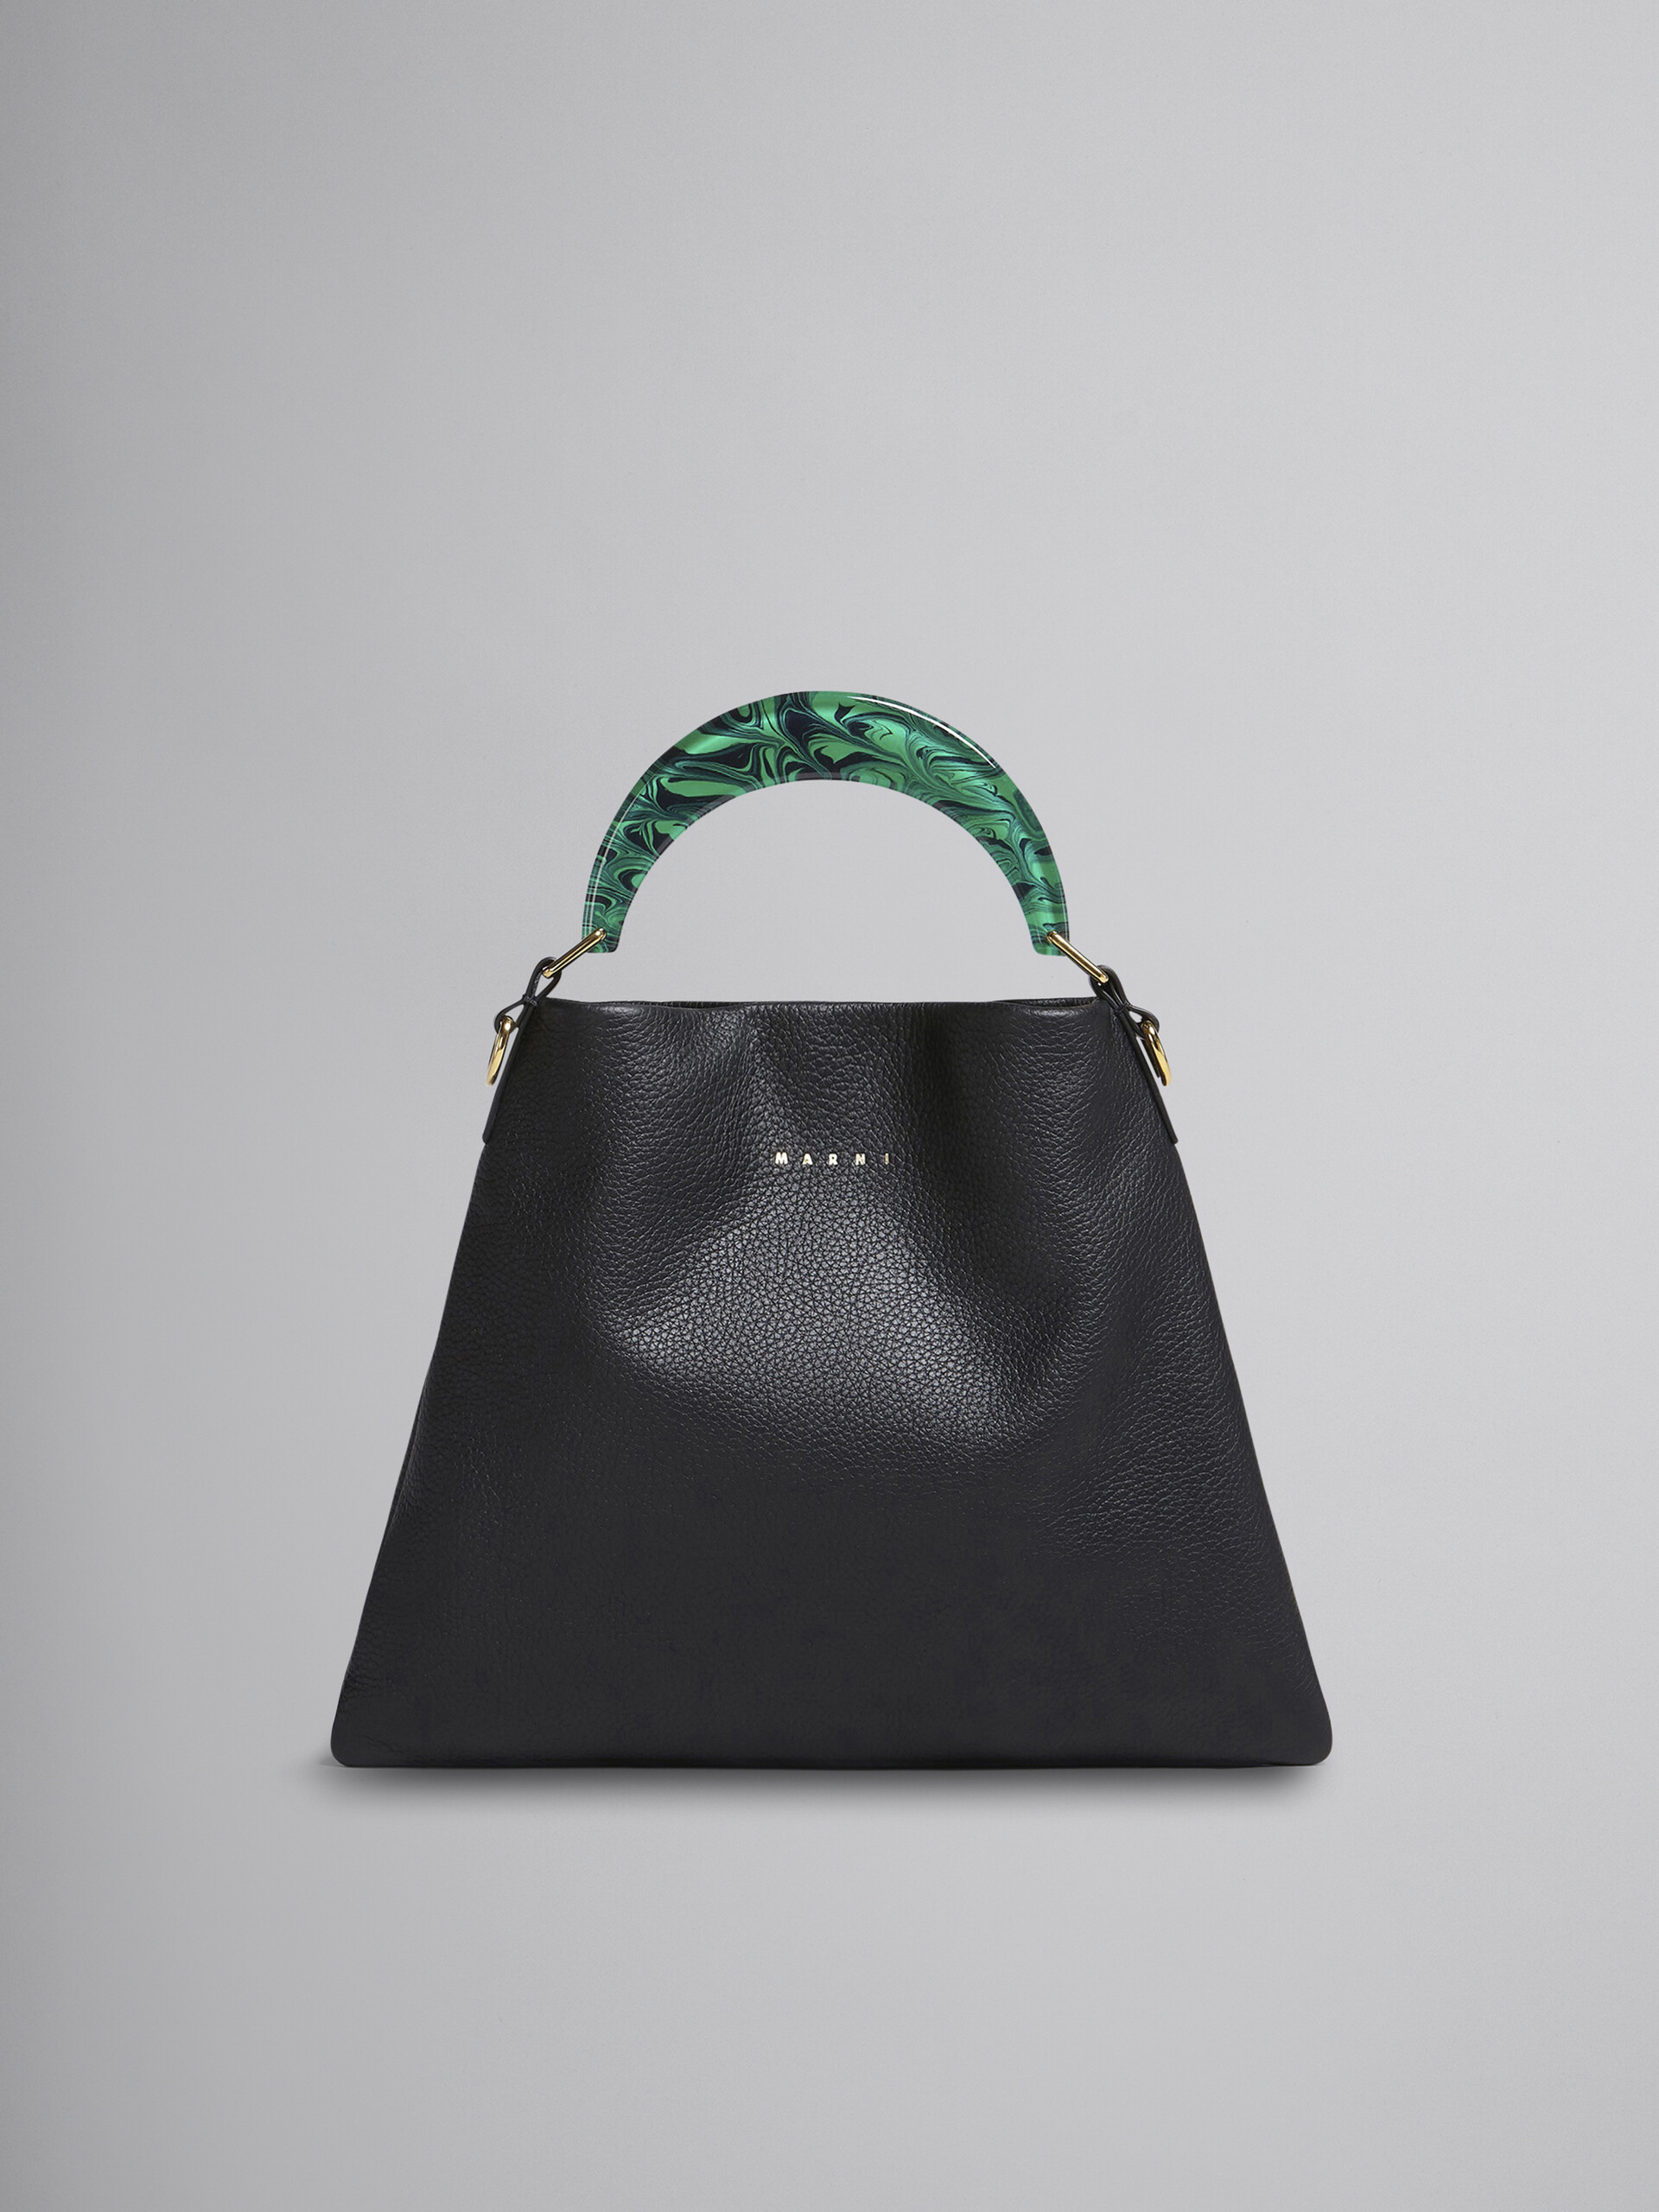 Venice Small Bag in black leather